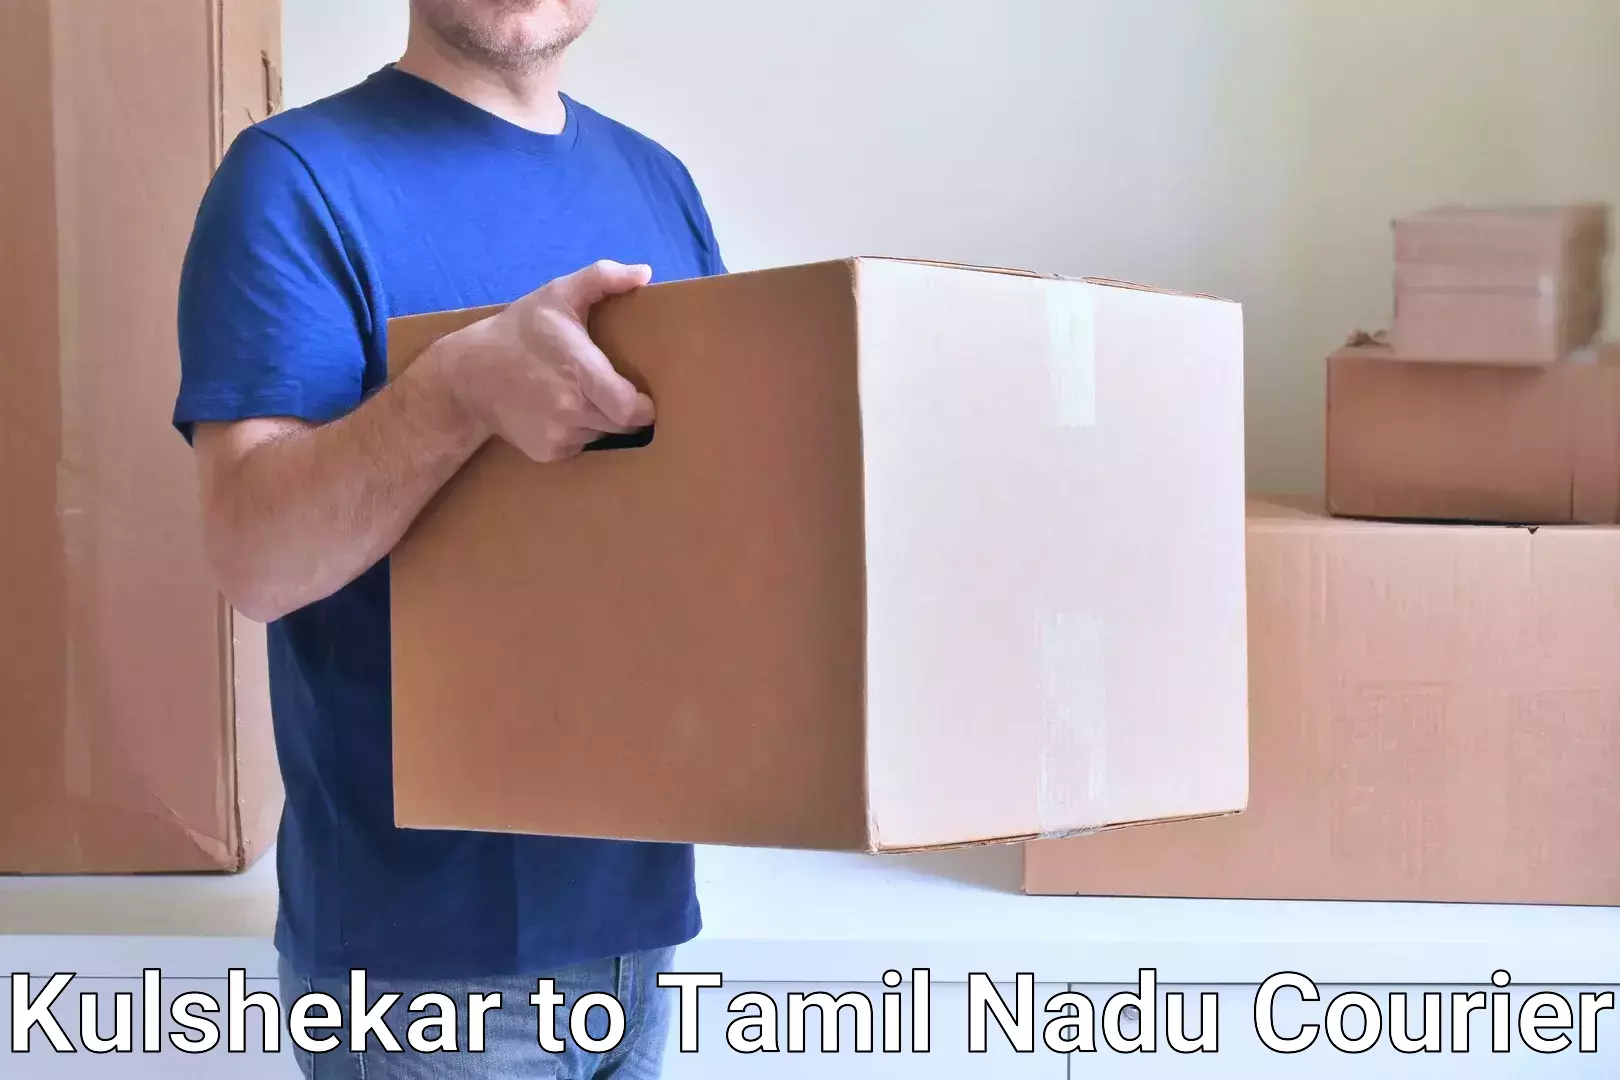 Postal and courier services Kulshekar to Chennai Port